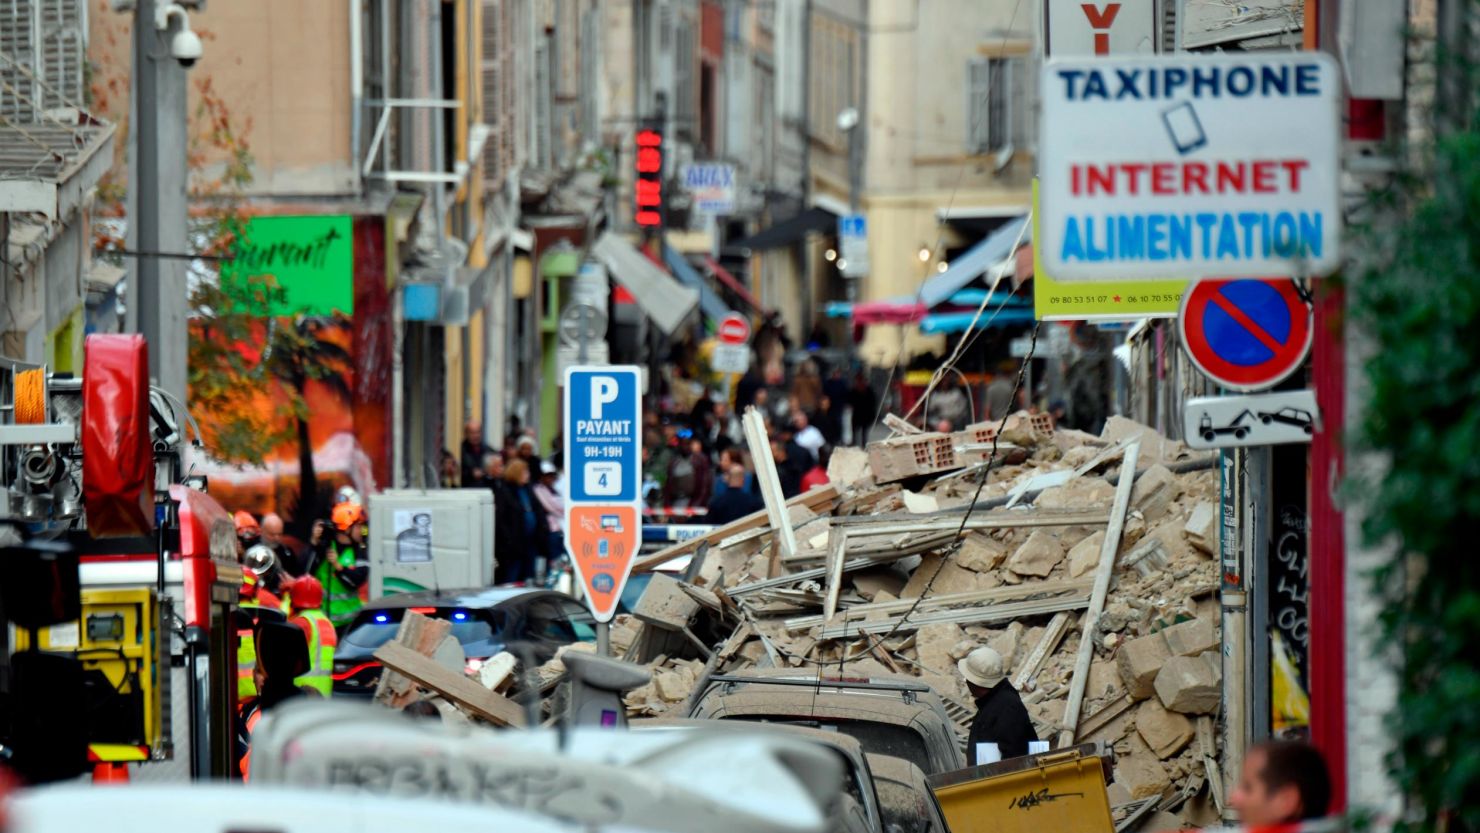 Authorities stand guard inside a security perimeter set around the Marseille buildings collapse.